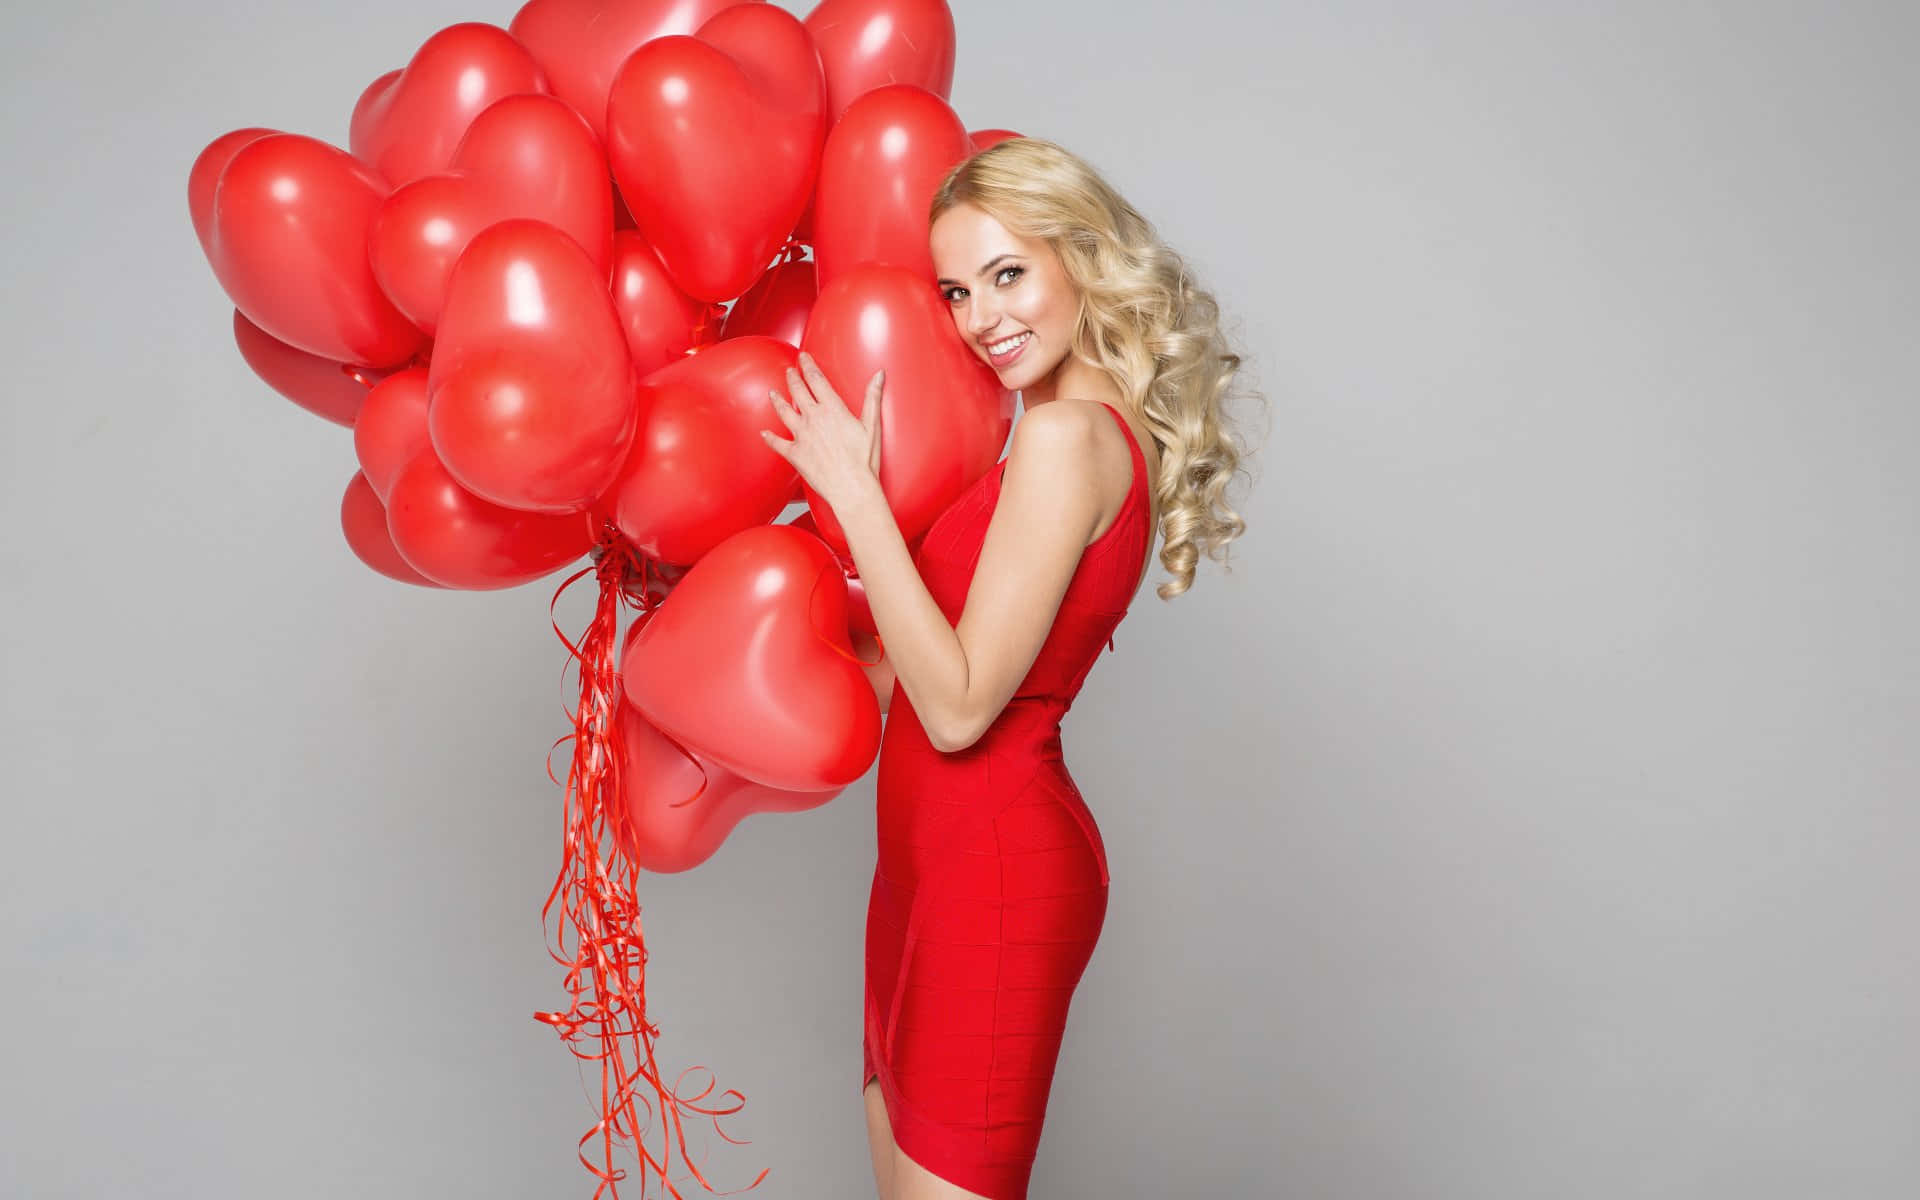 Lively Balloons Picture